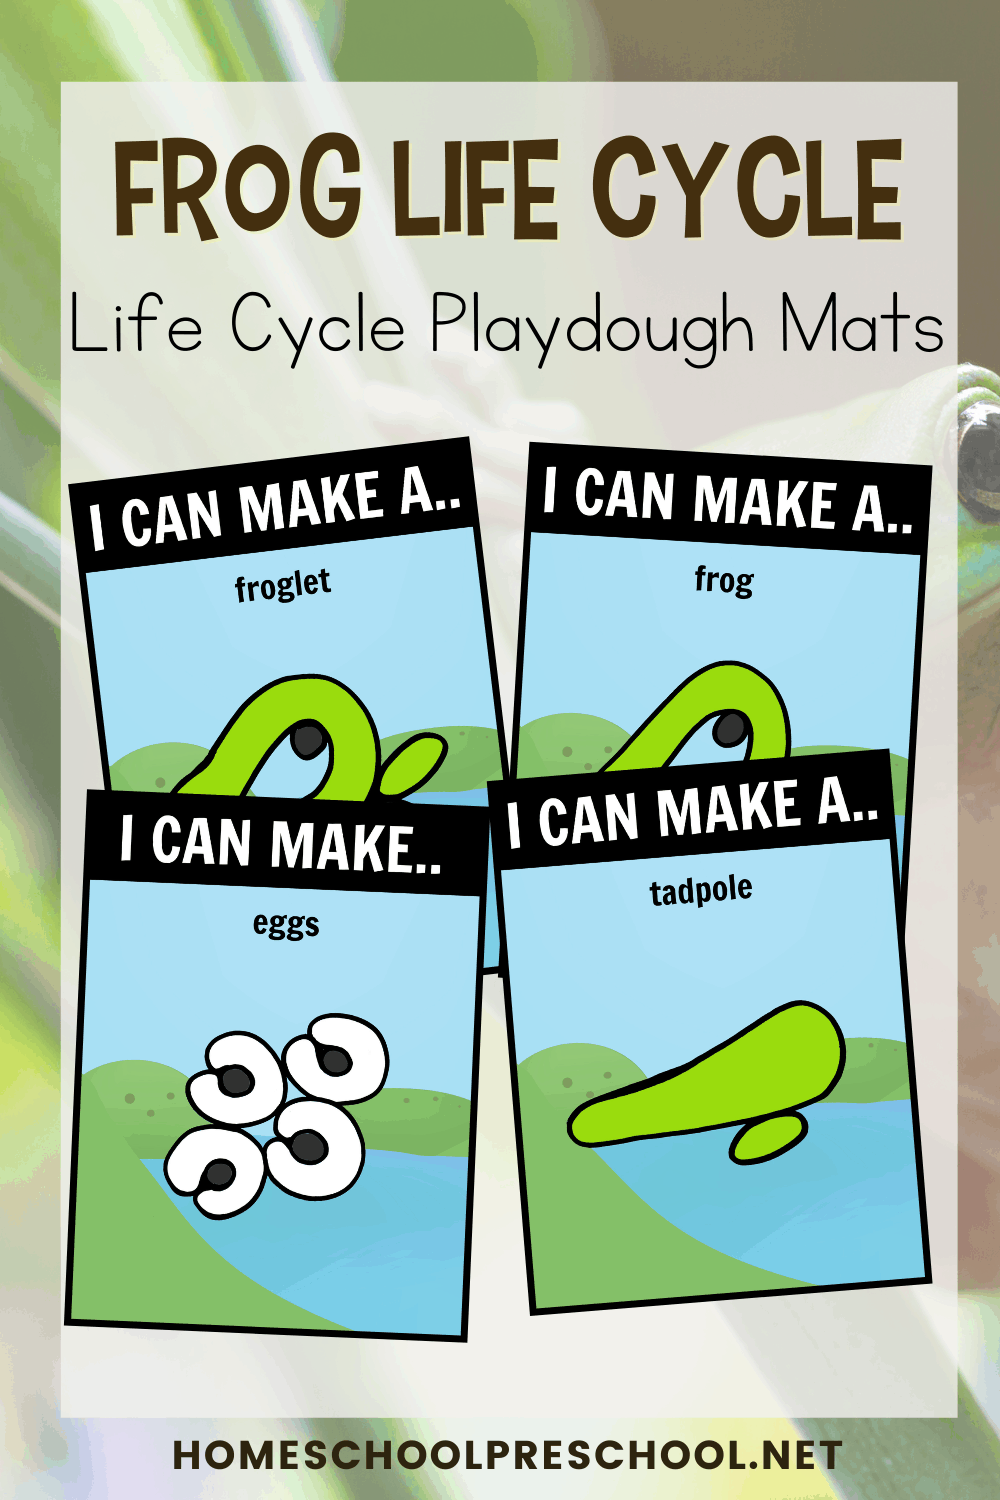 Life Cycle of a Frog for Kids